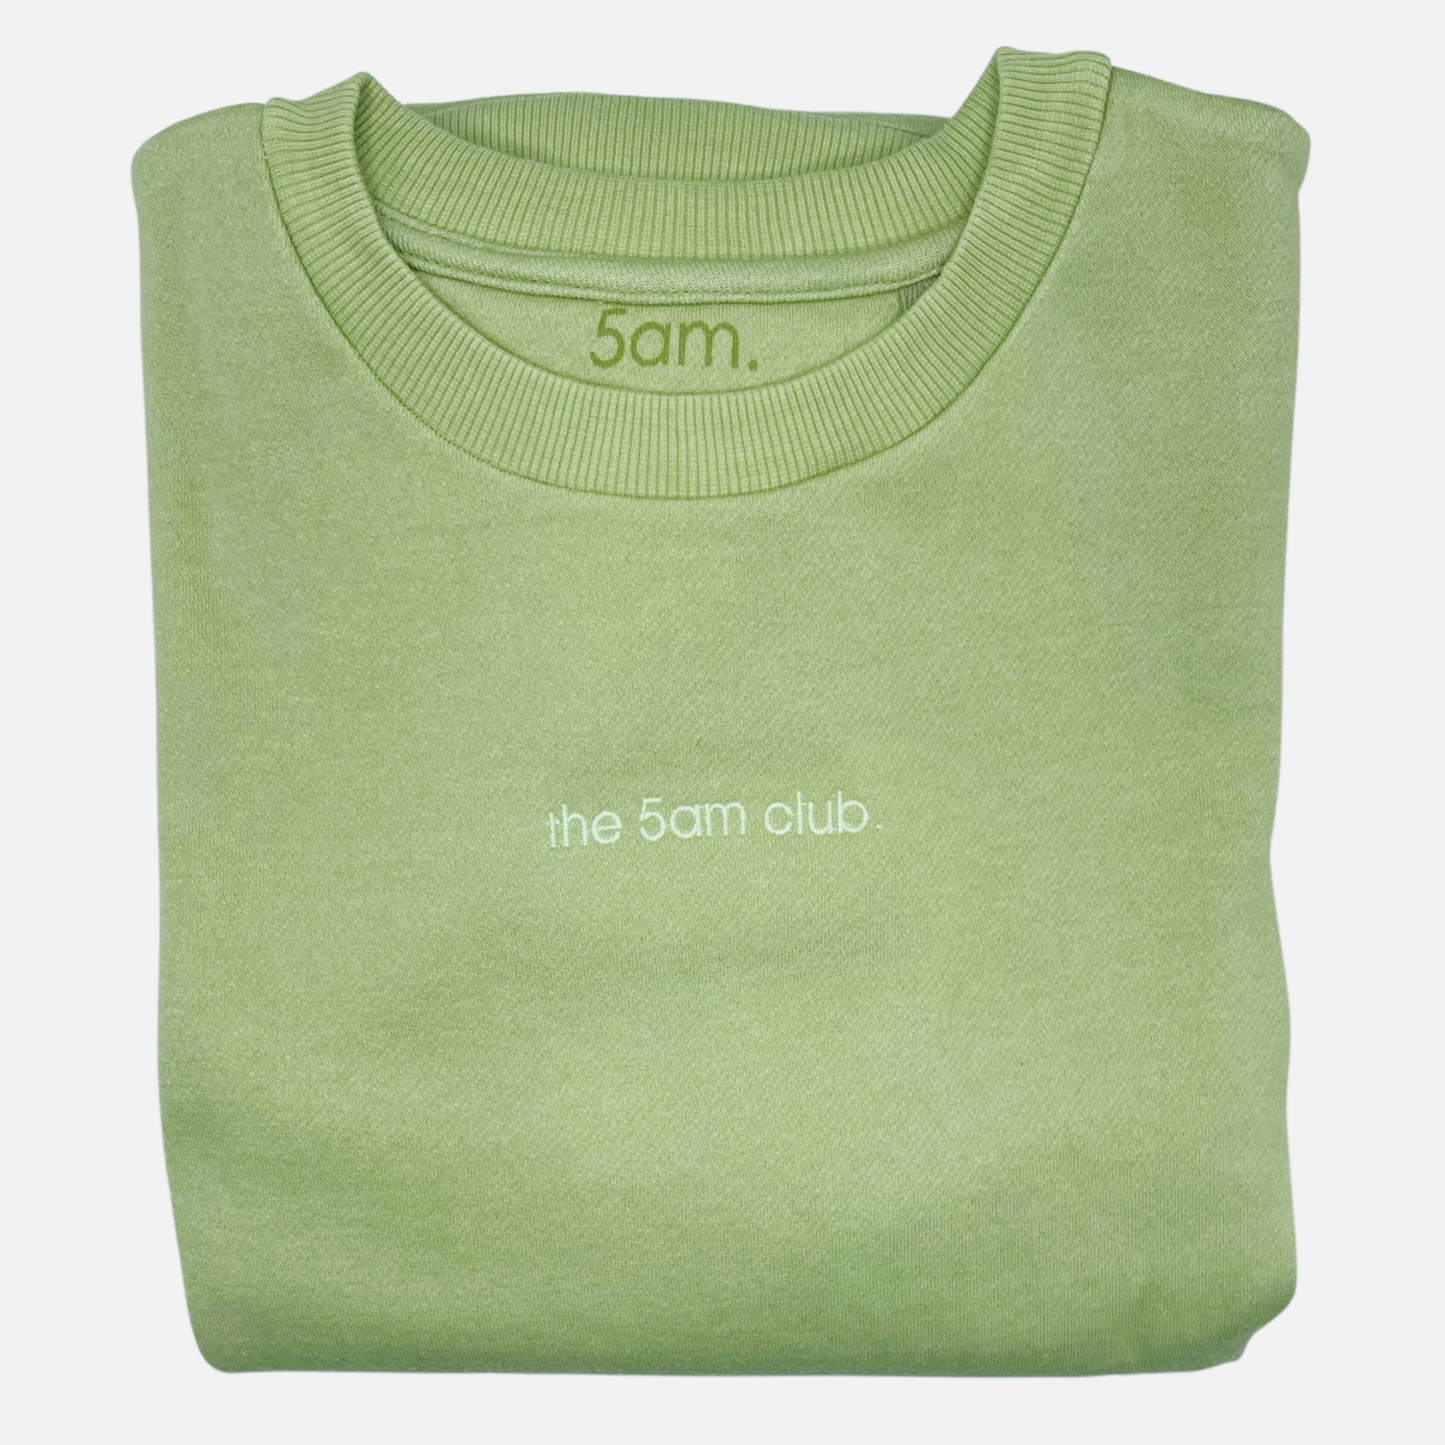 sage green womens sweatshirt with the 5am club logo on the chest